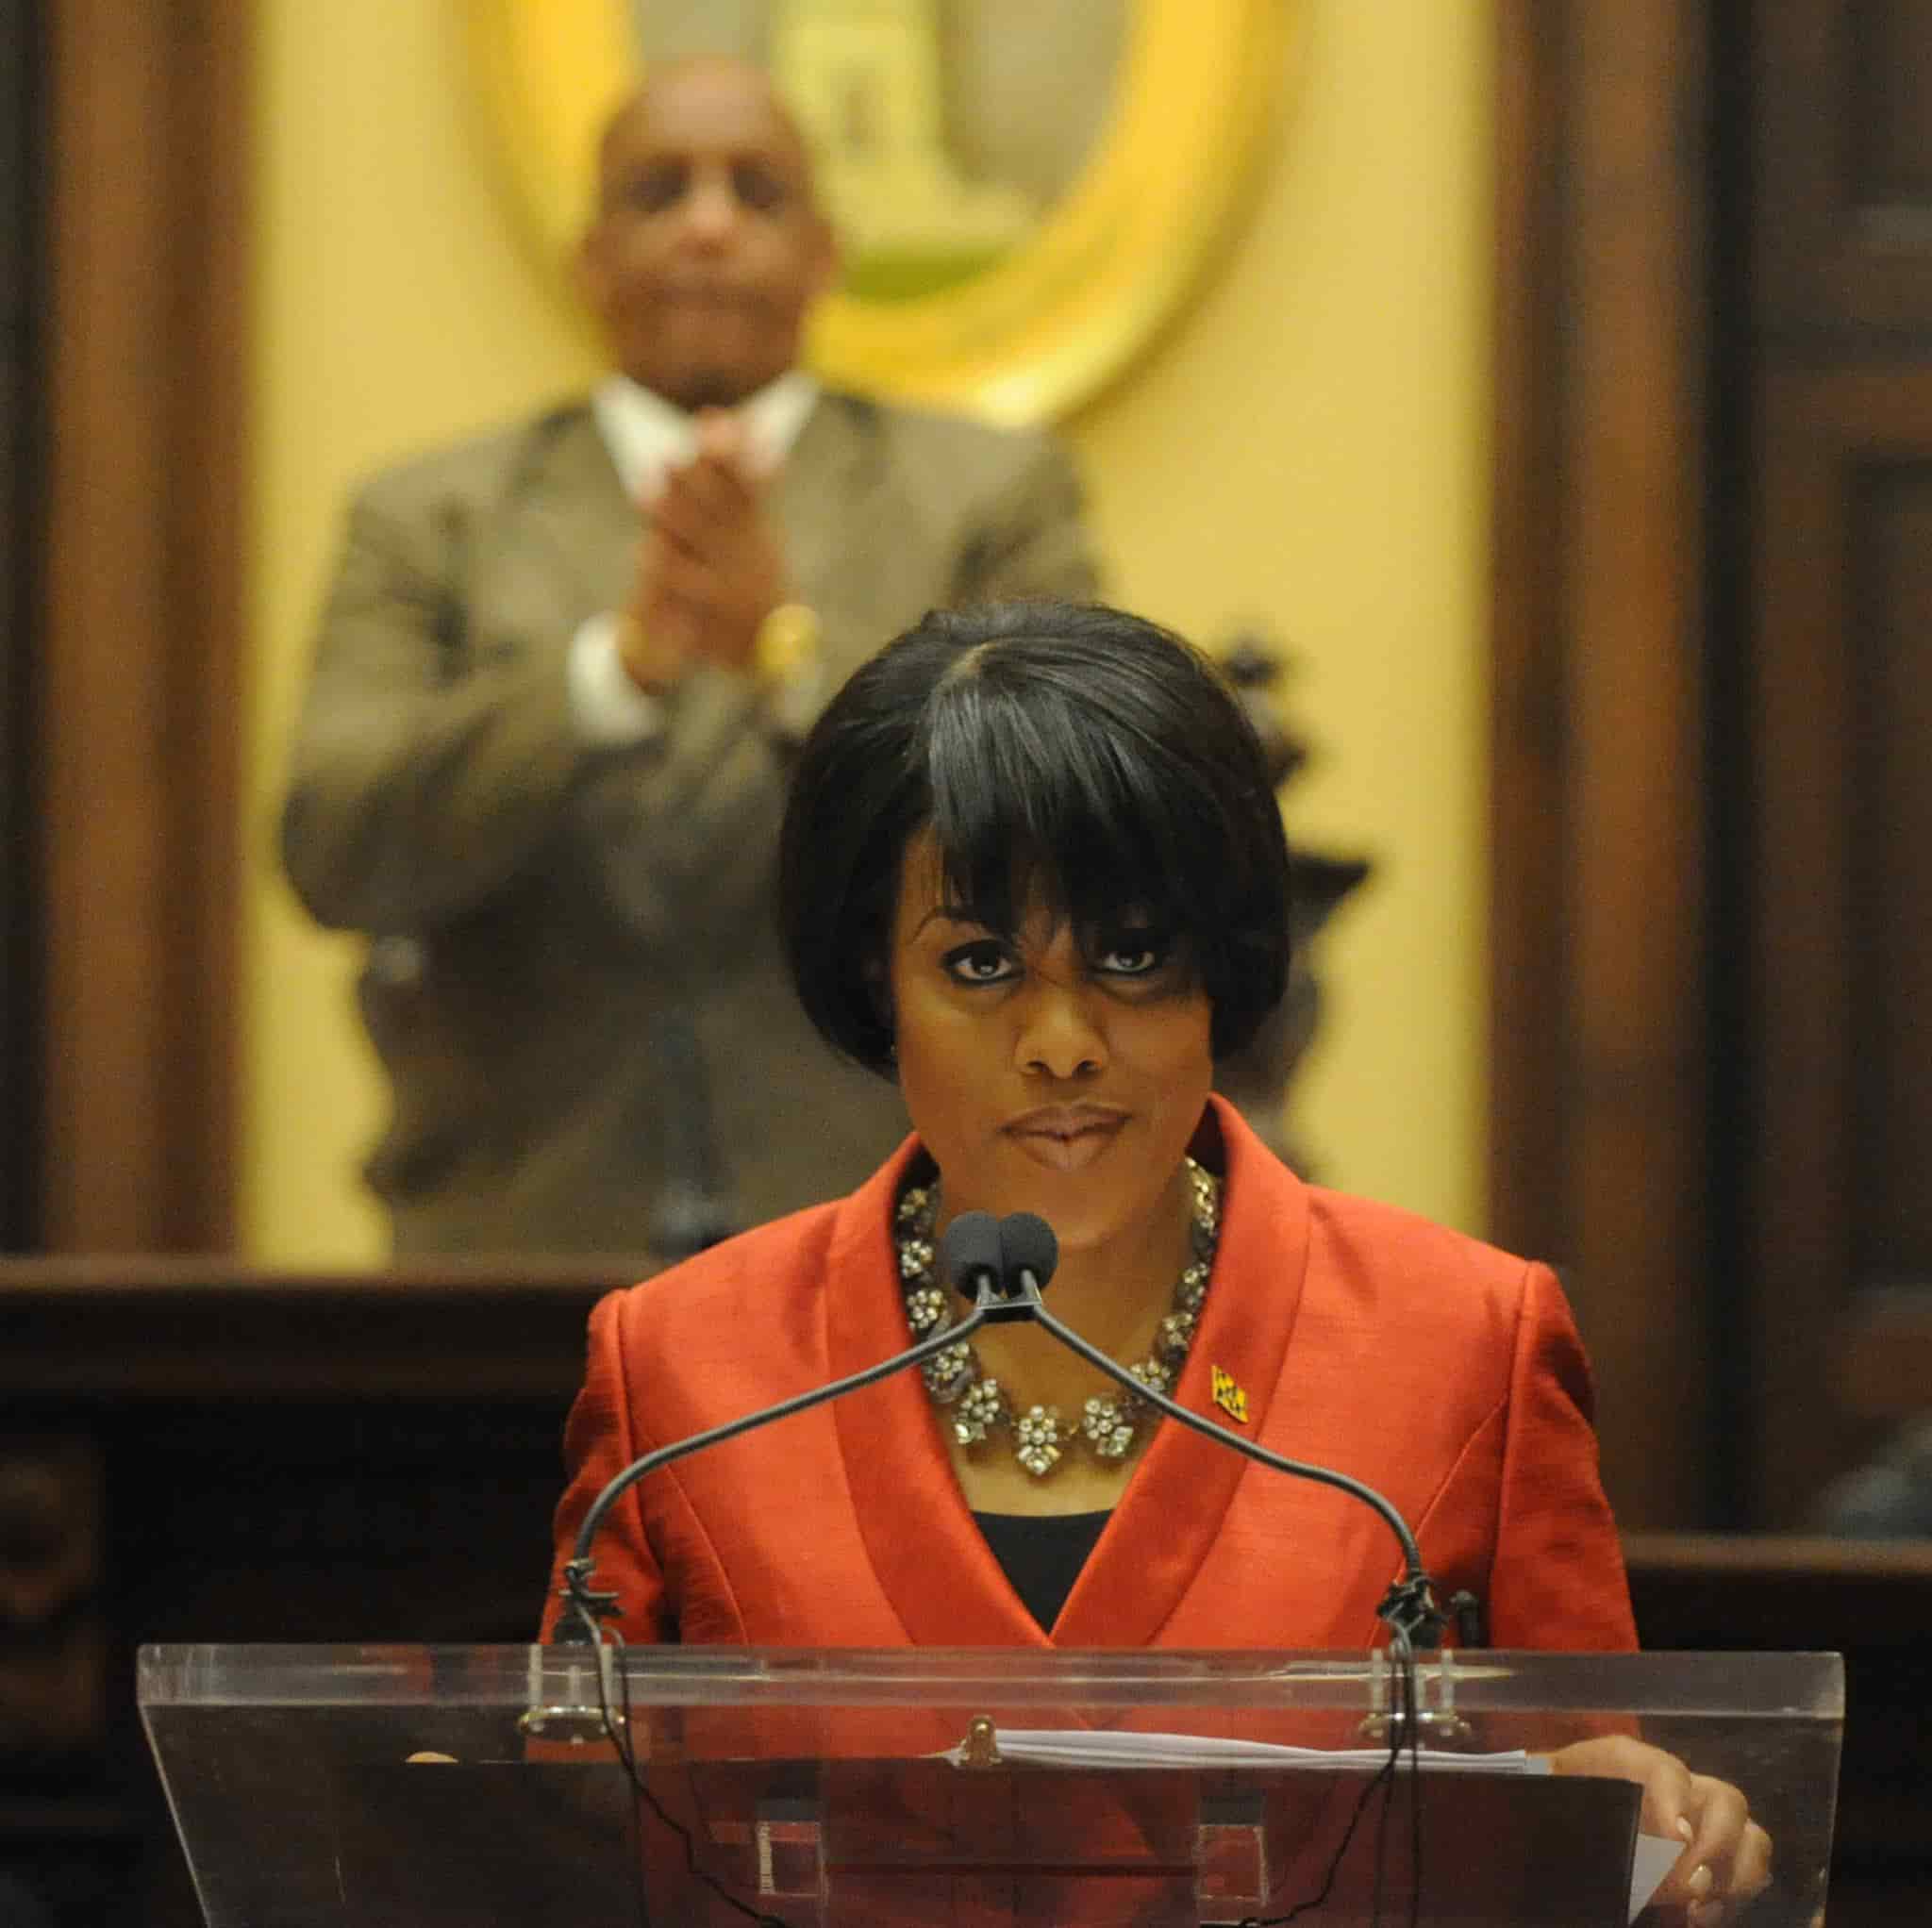 Image of Stephanie Rawlings-Blake after her weight loss